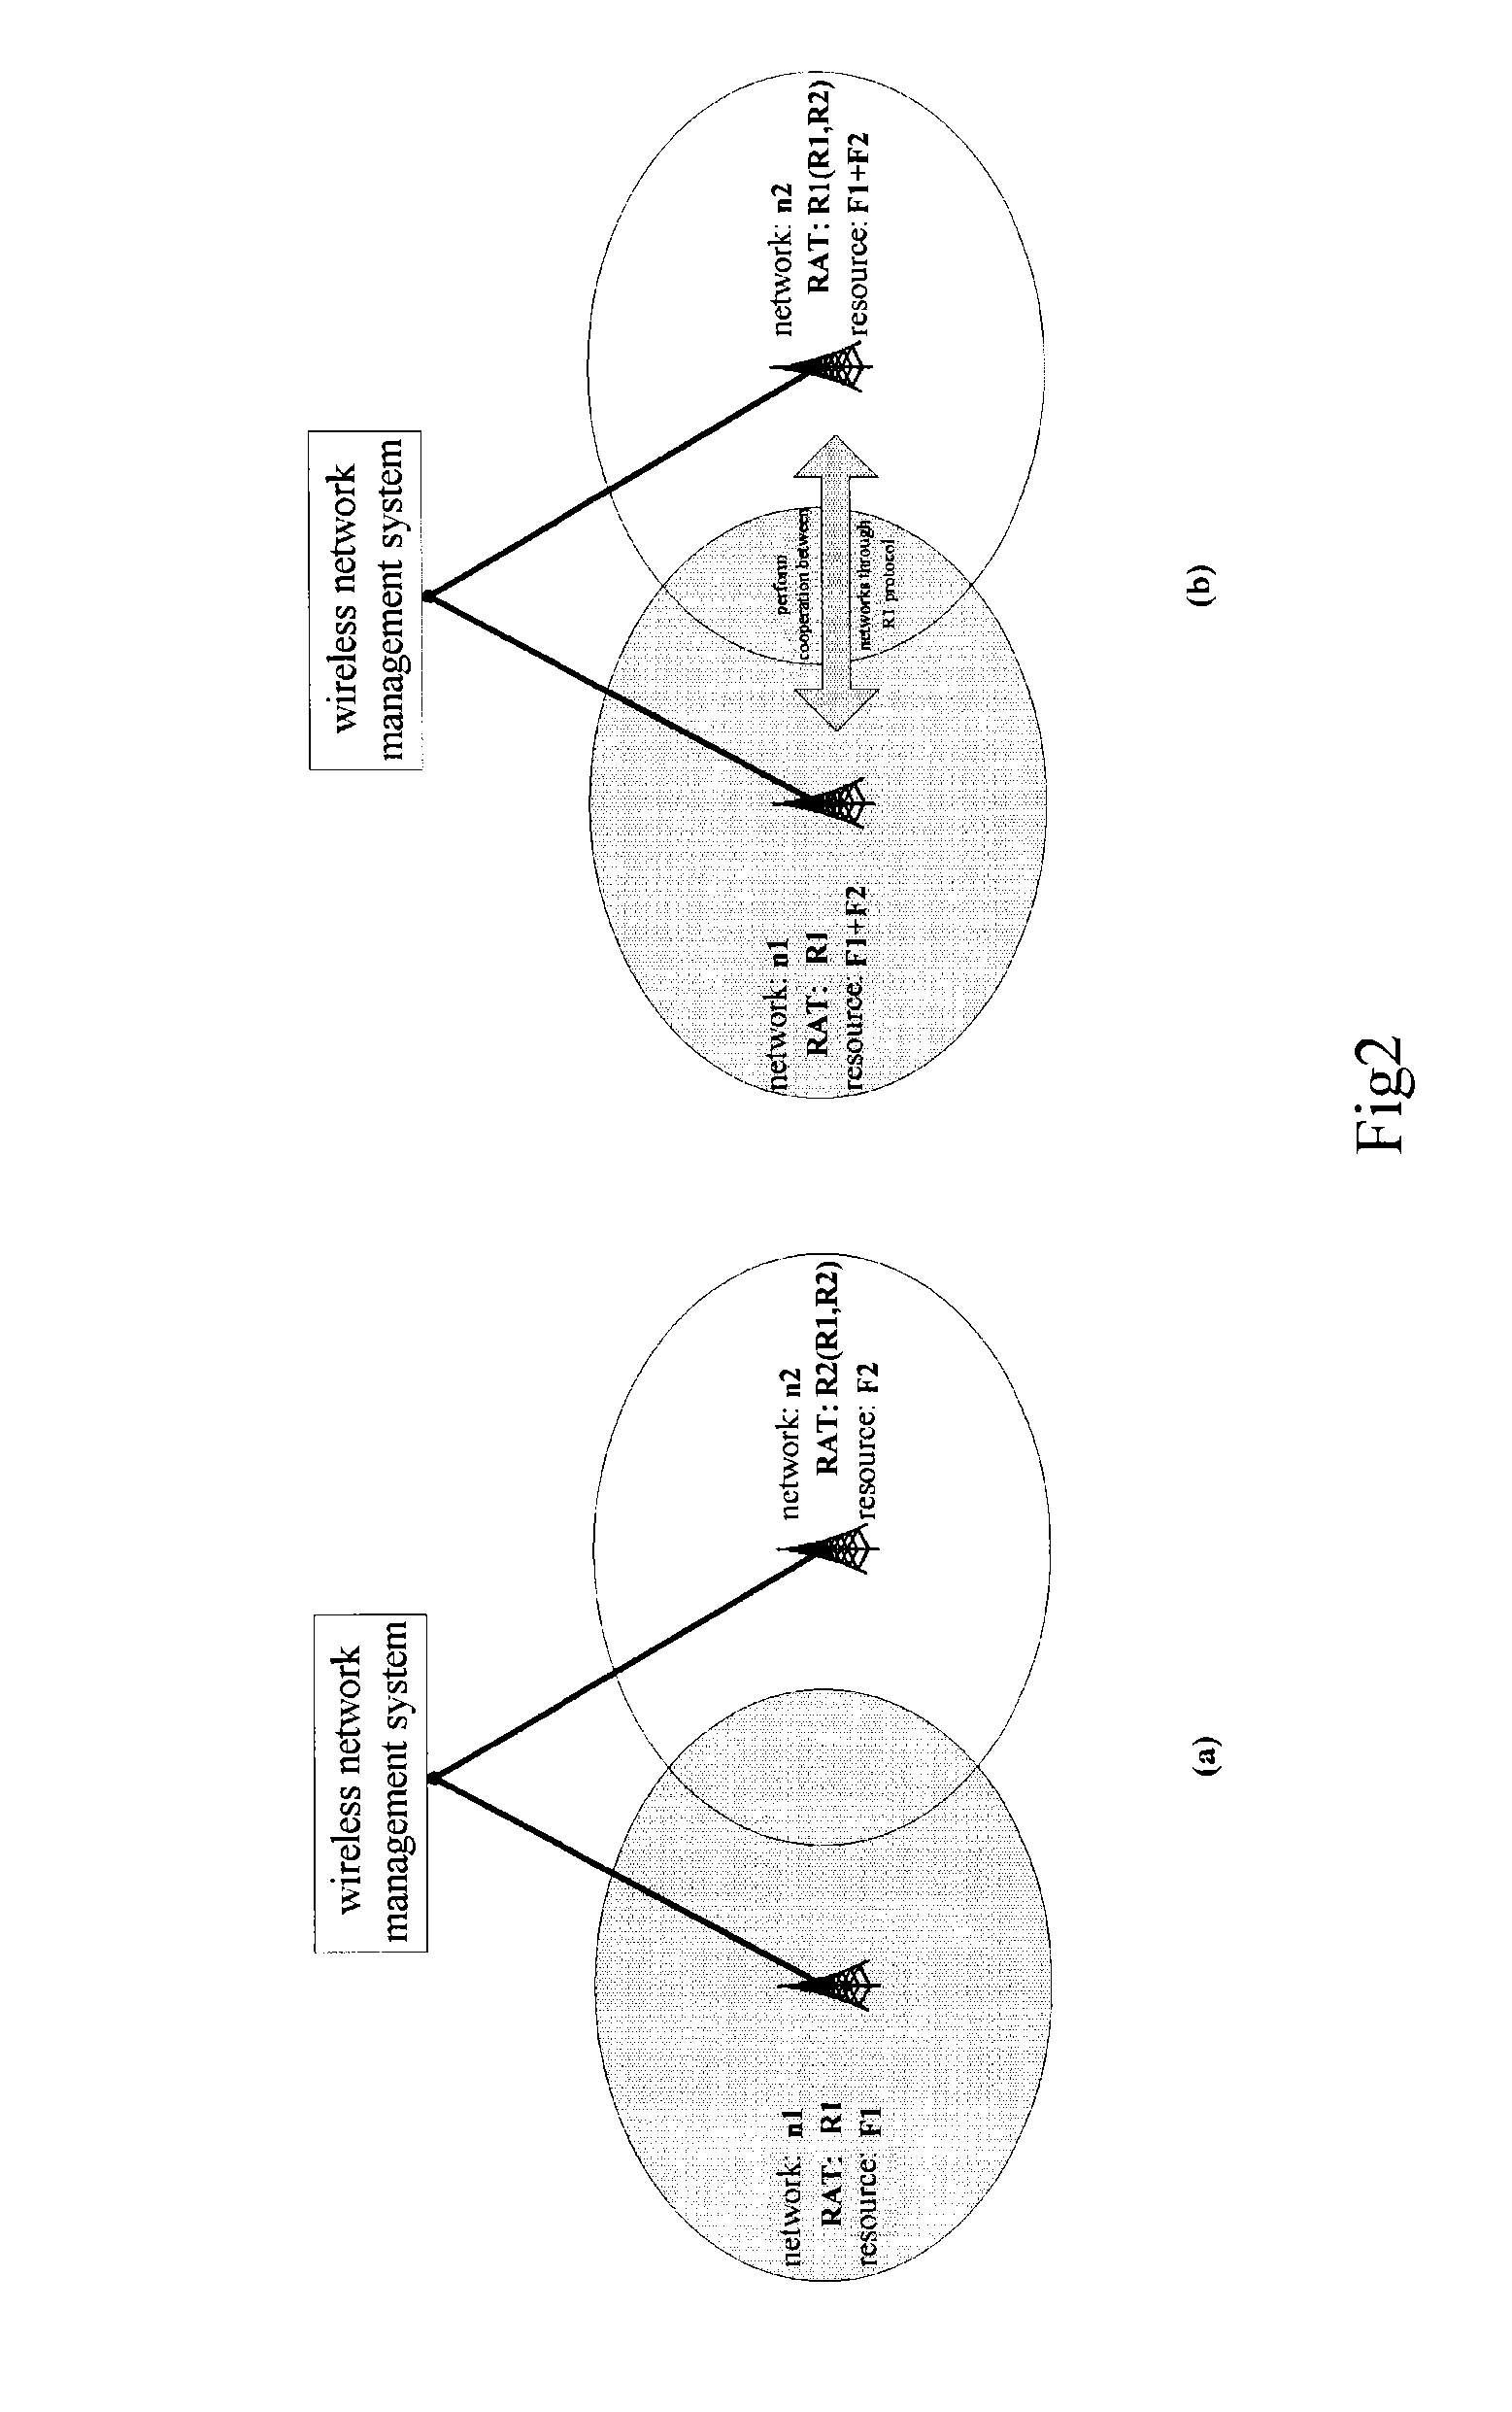 System and method for wireless network management